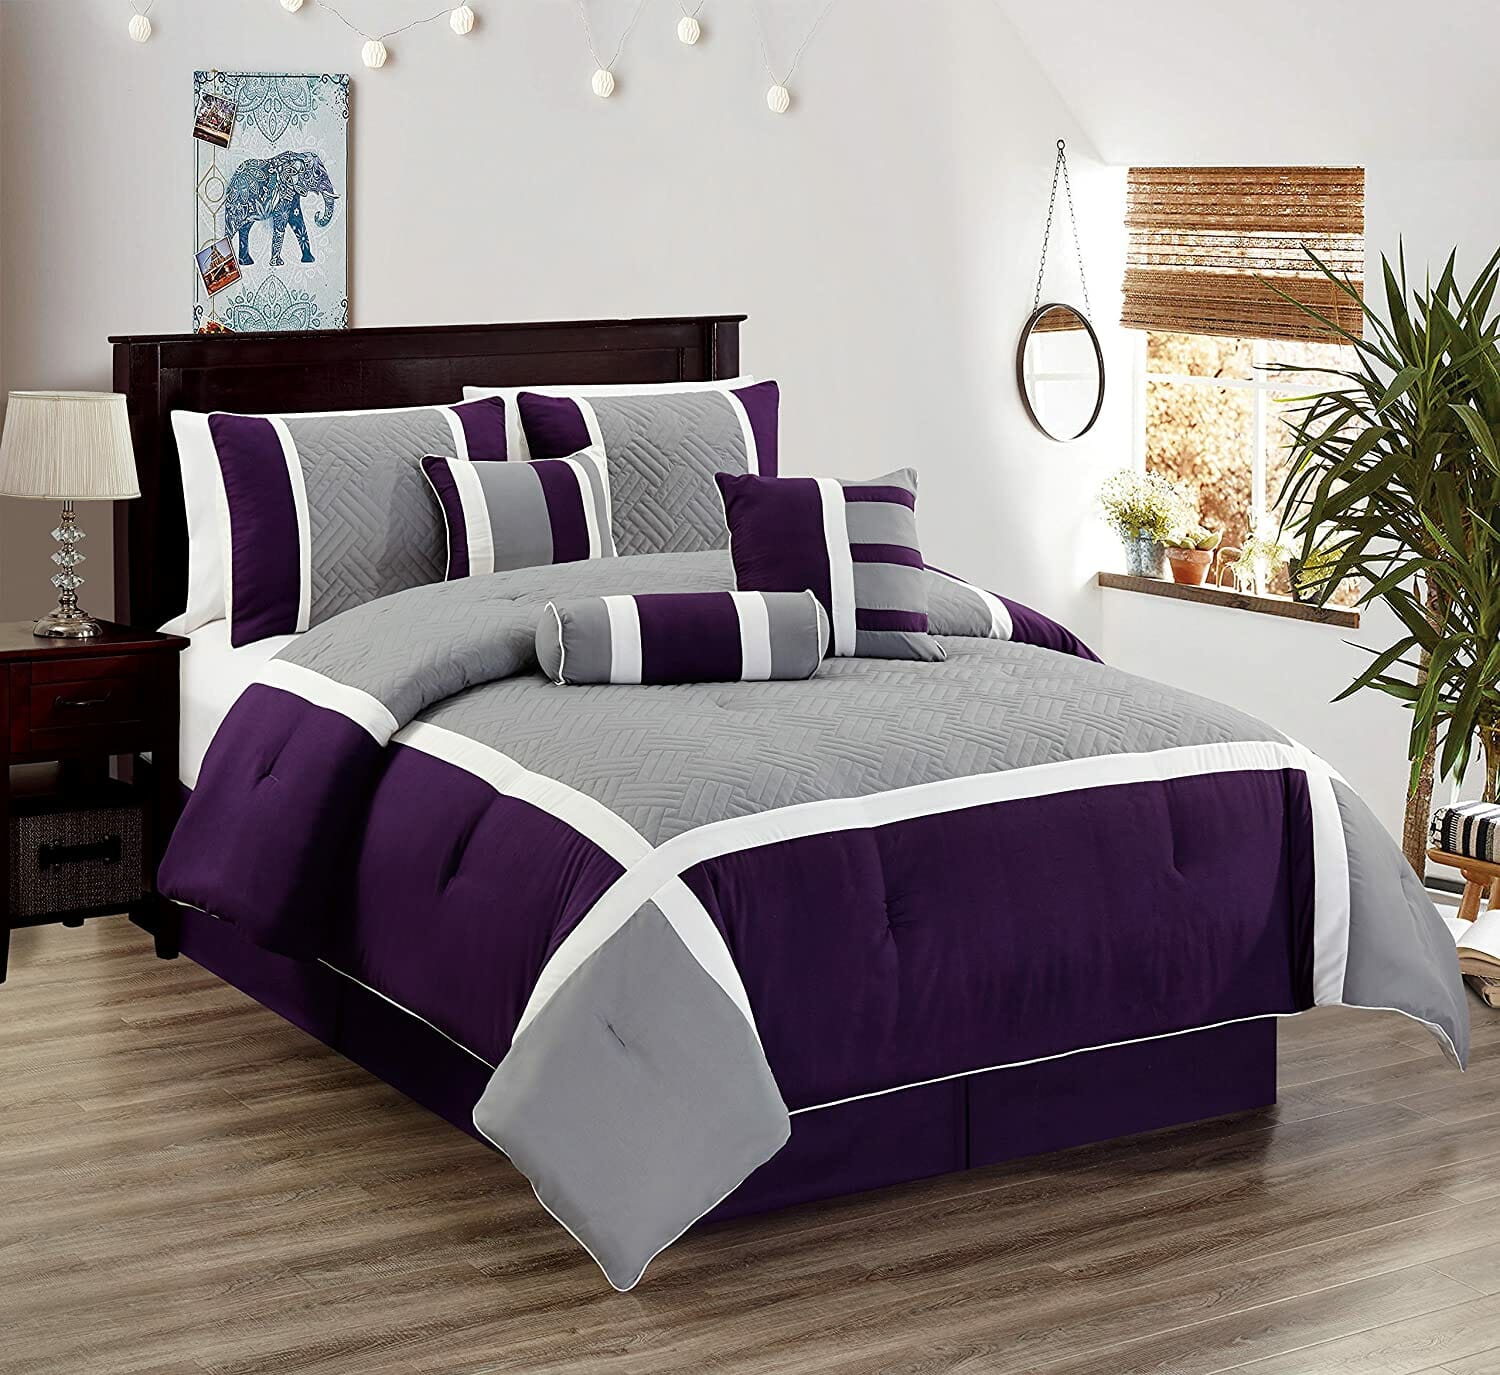 The 10 Best Dorm Bedding for Male College Students in 2023 - Online ...